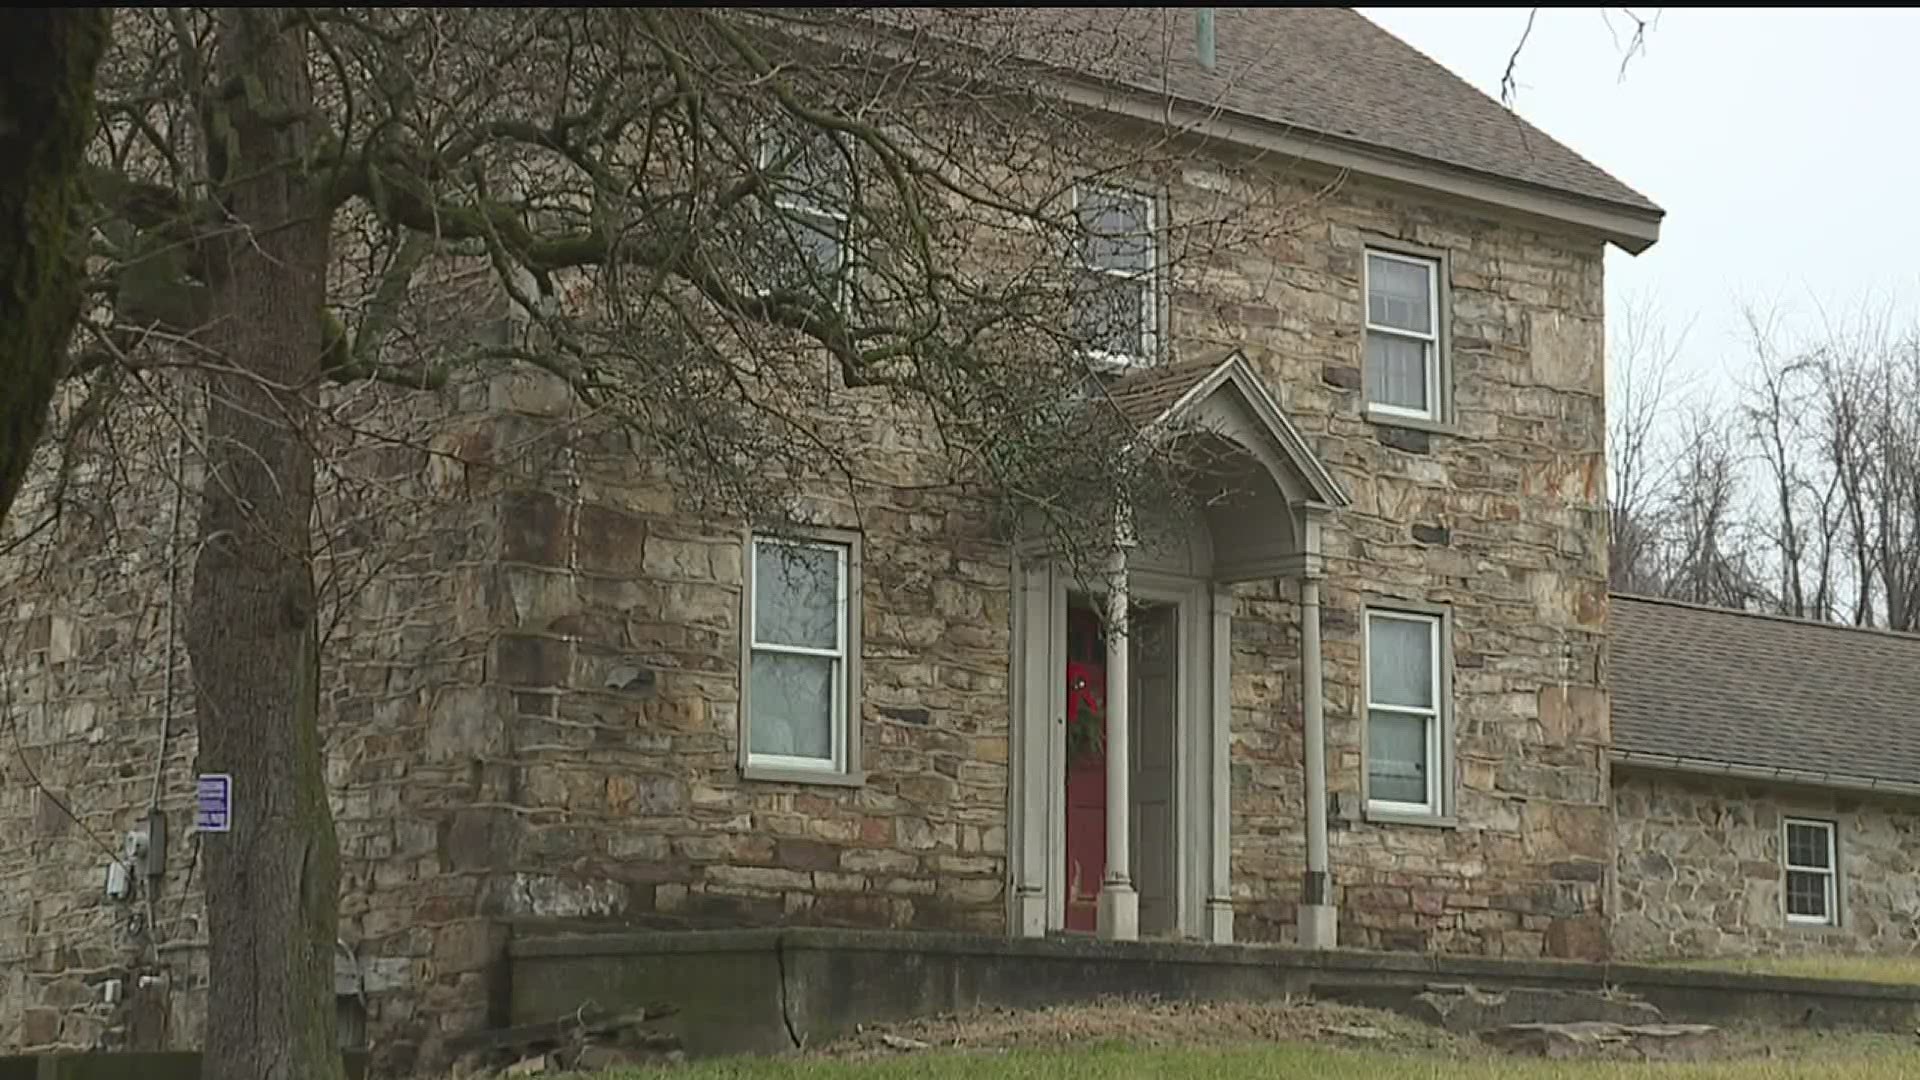 Historic Enola Miller house to be moved for future project plans in the township